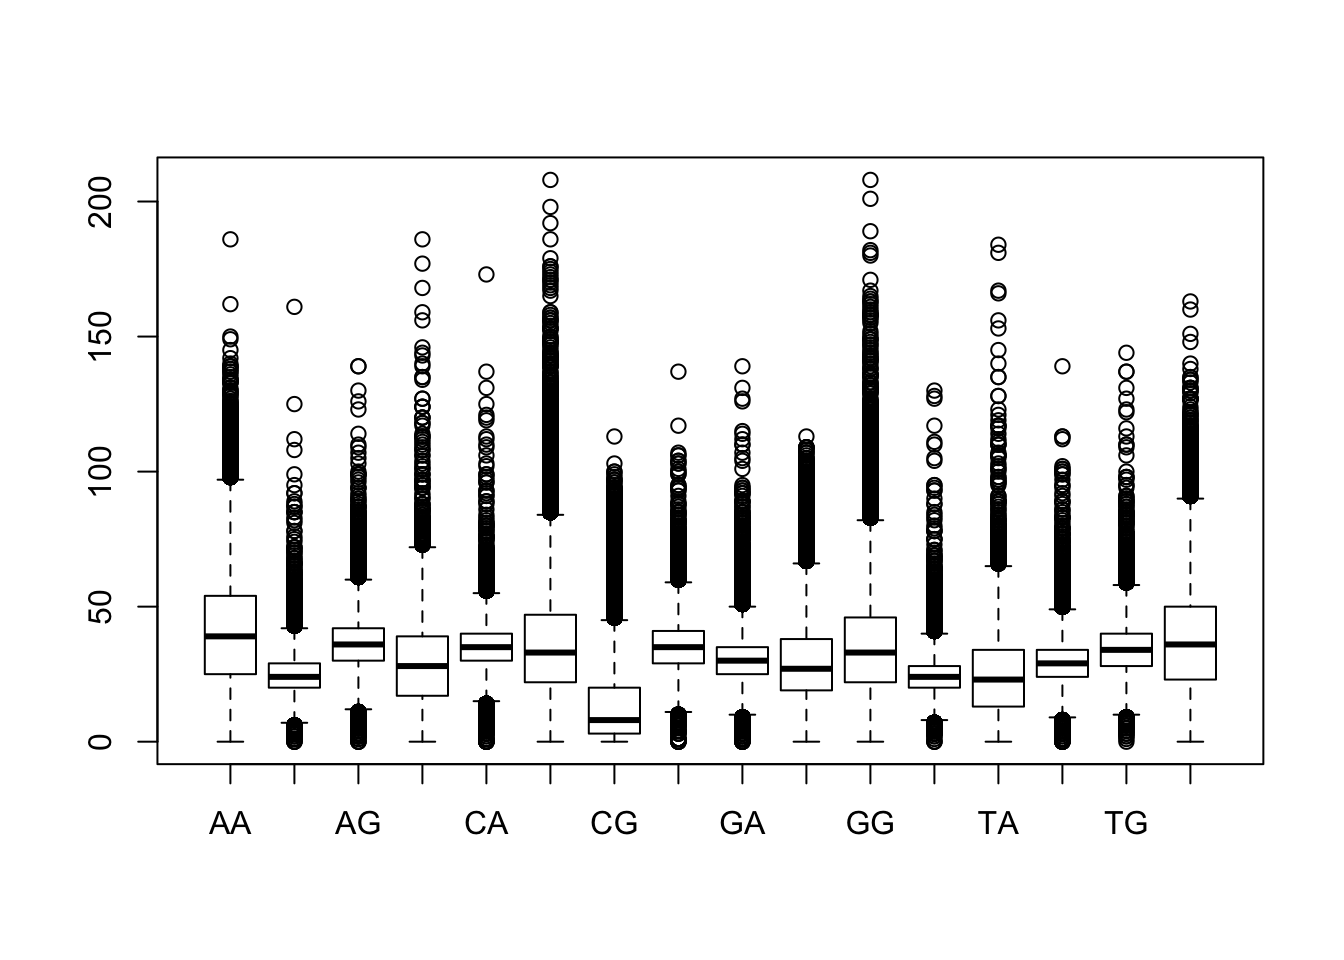 Boxplot of dinucleotide counts in all promoters. 